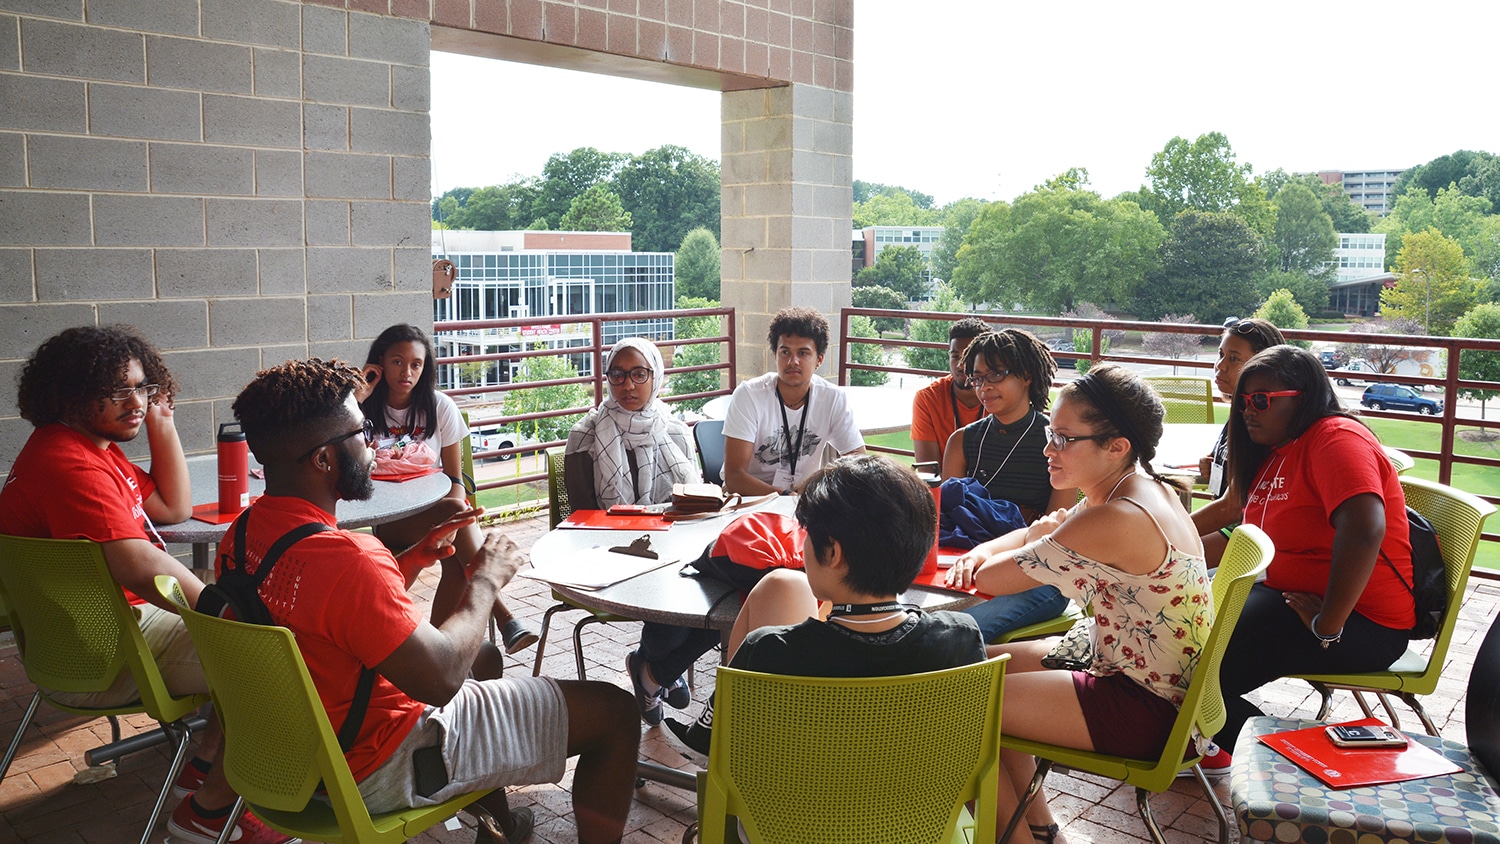 Students sitting around a table participate in a discussion session during the Symposium for Multicultural Scholars